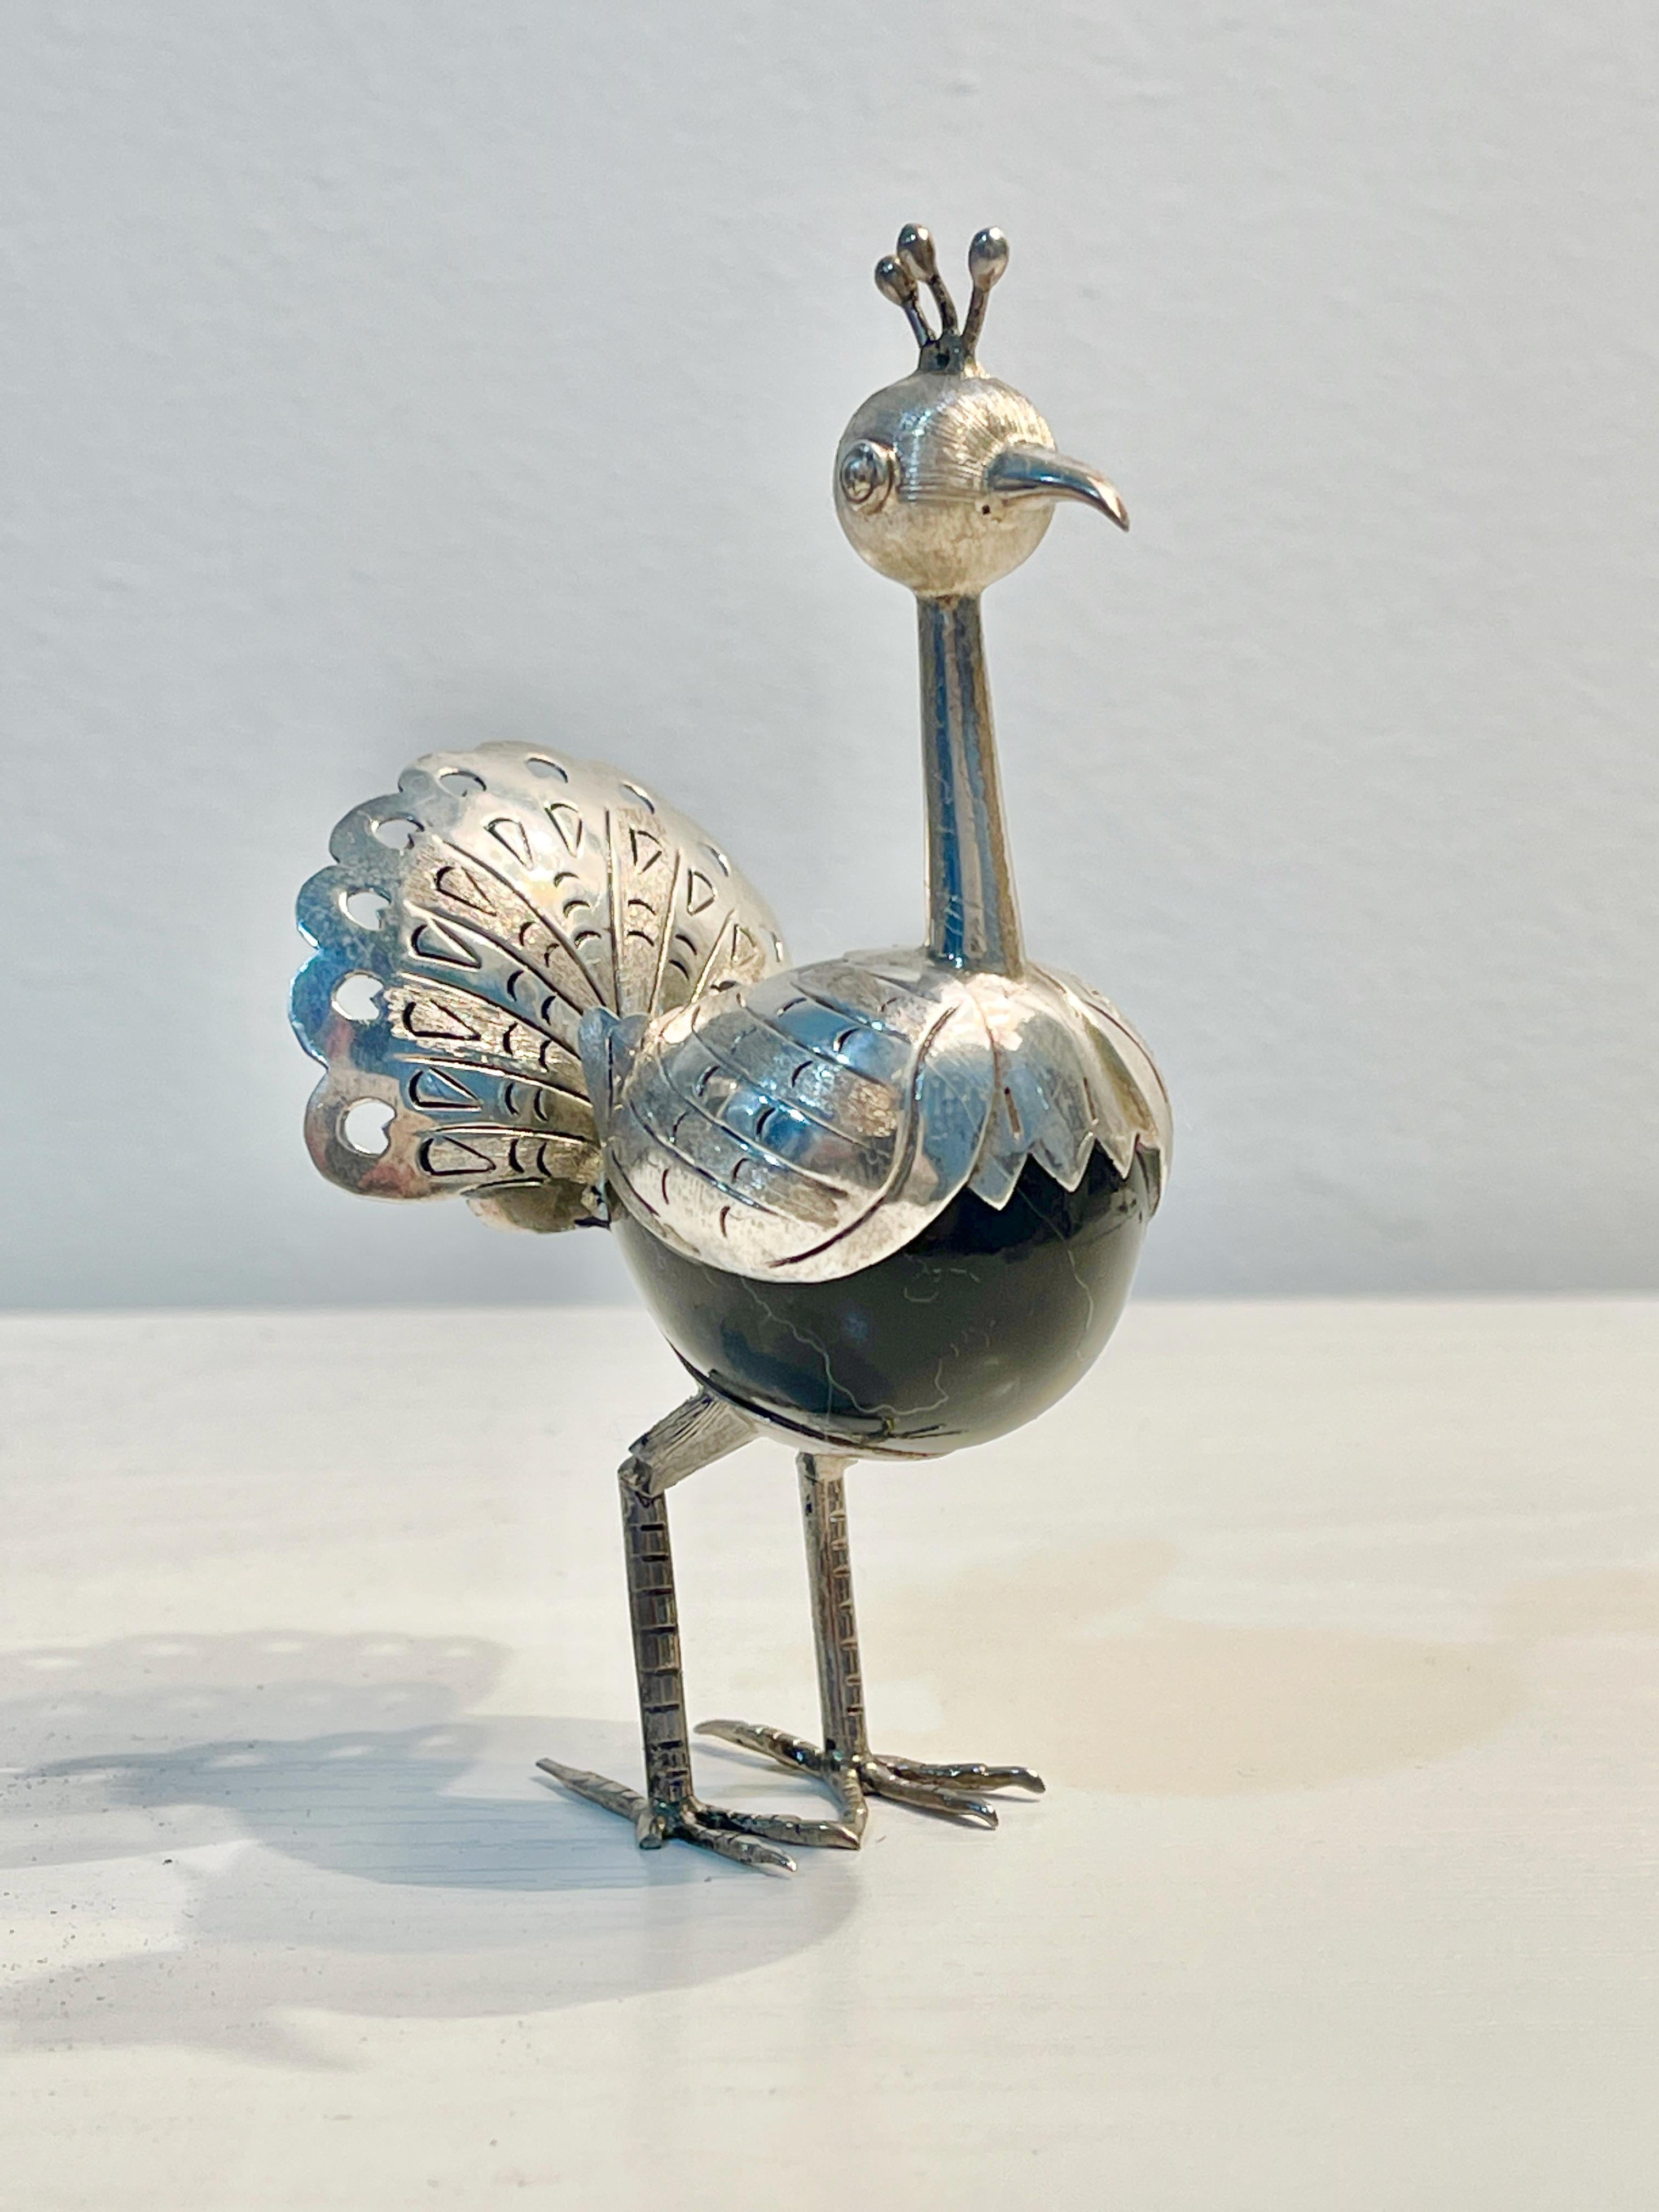 Taxco Mexico 925 sterling silver quail with egg shaped black onyx body, marked TR-104. Standing sculpture.